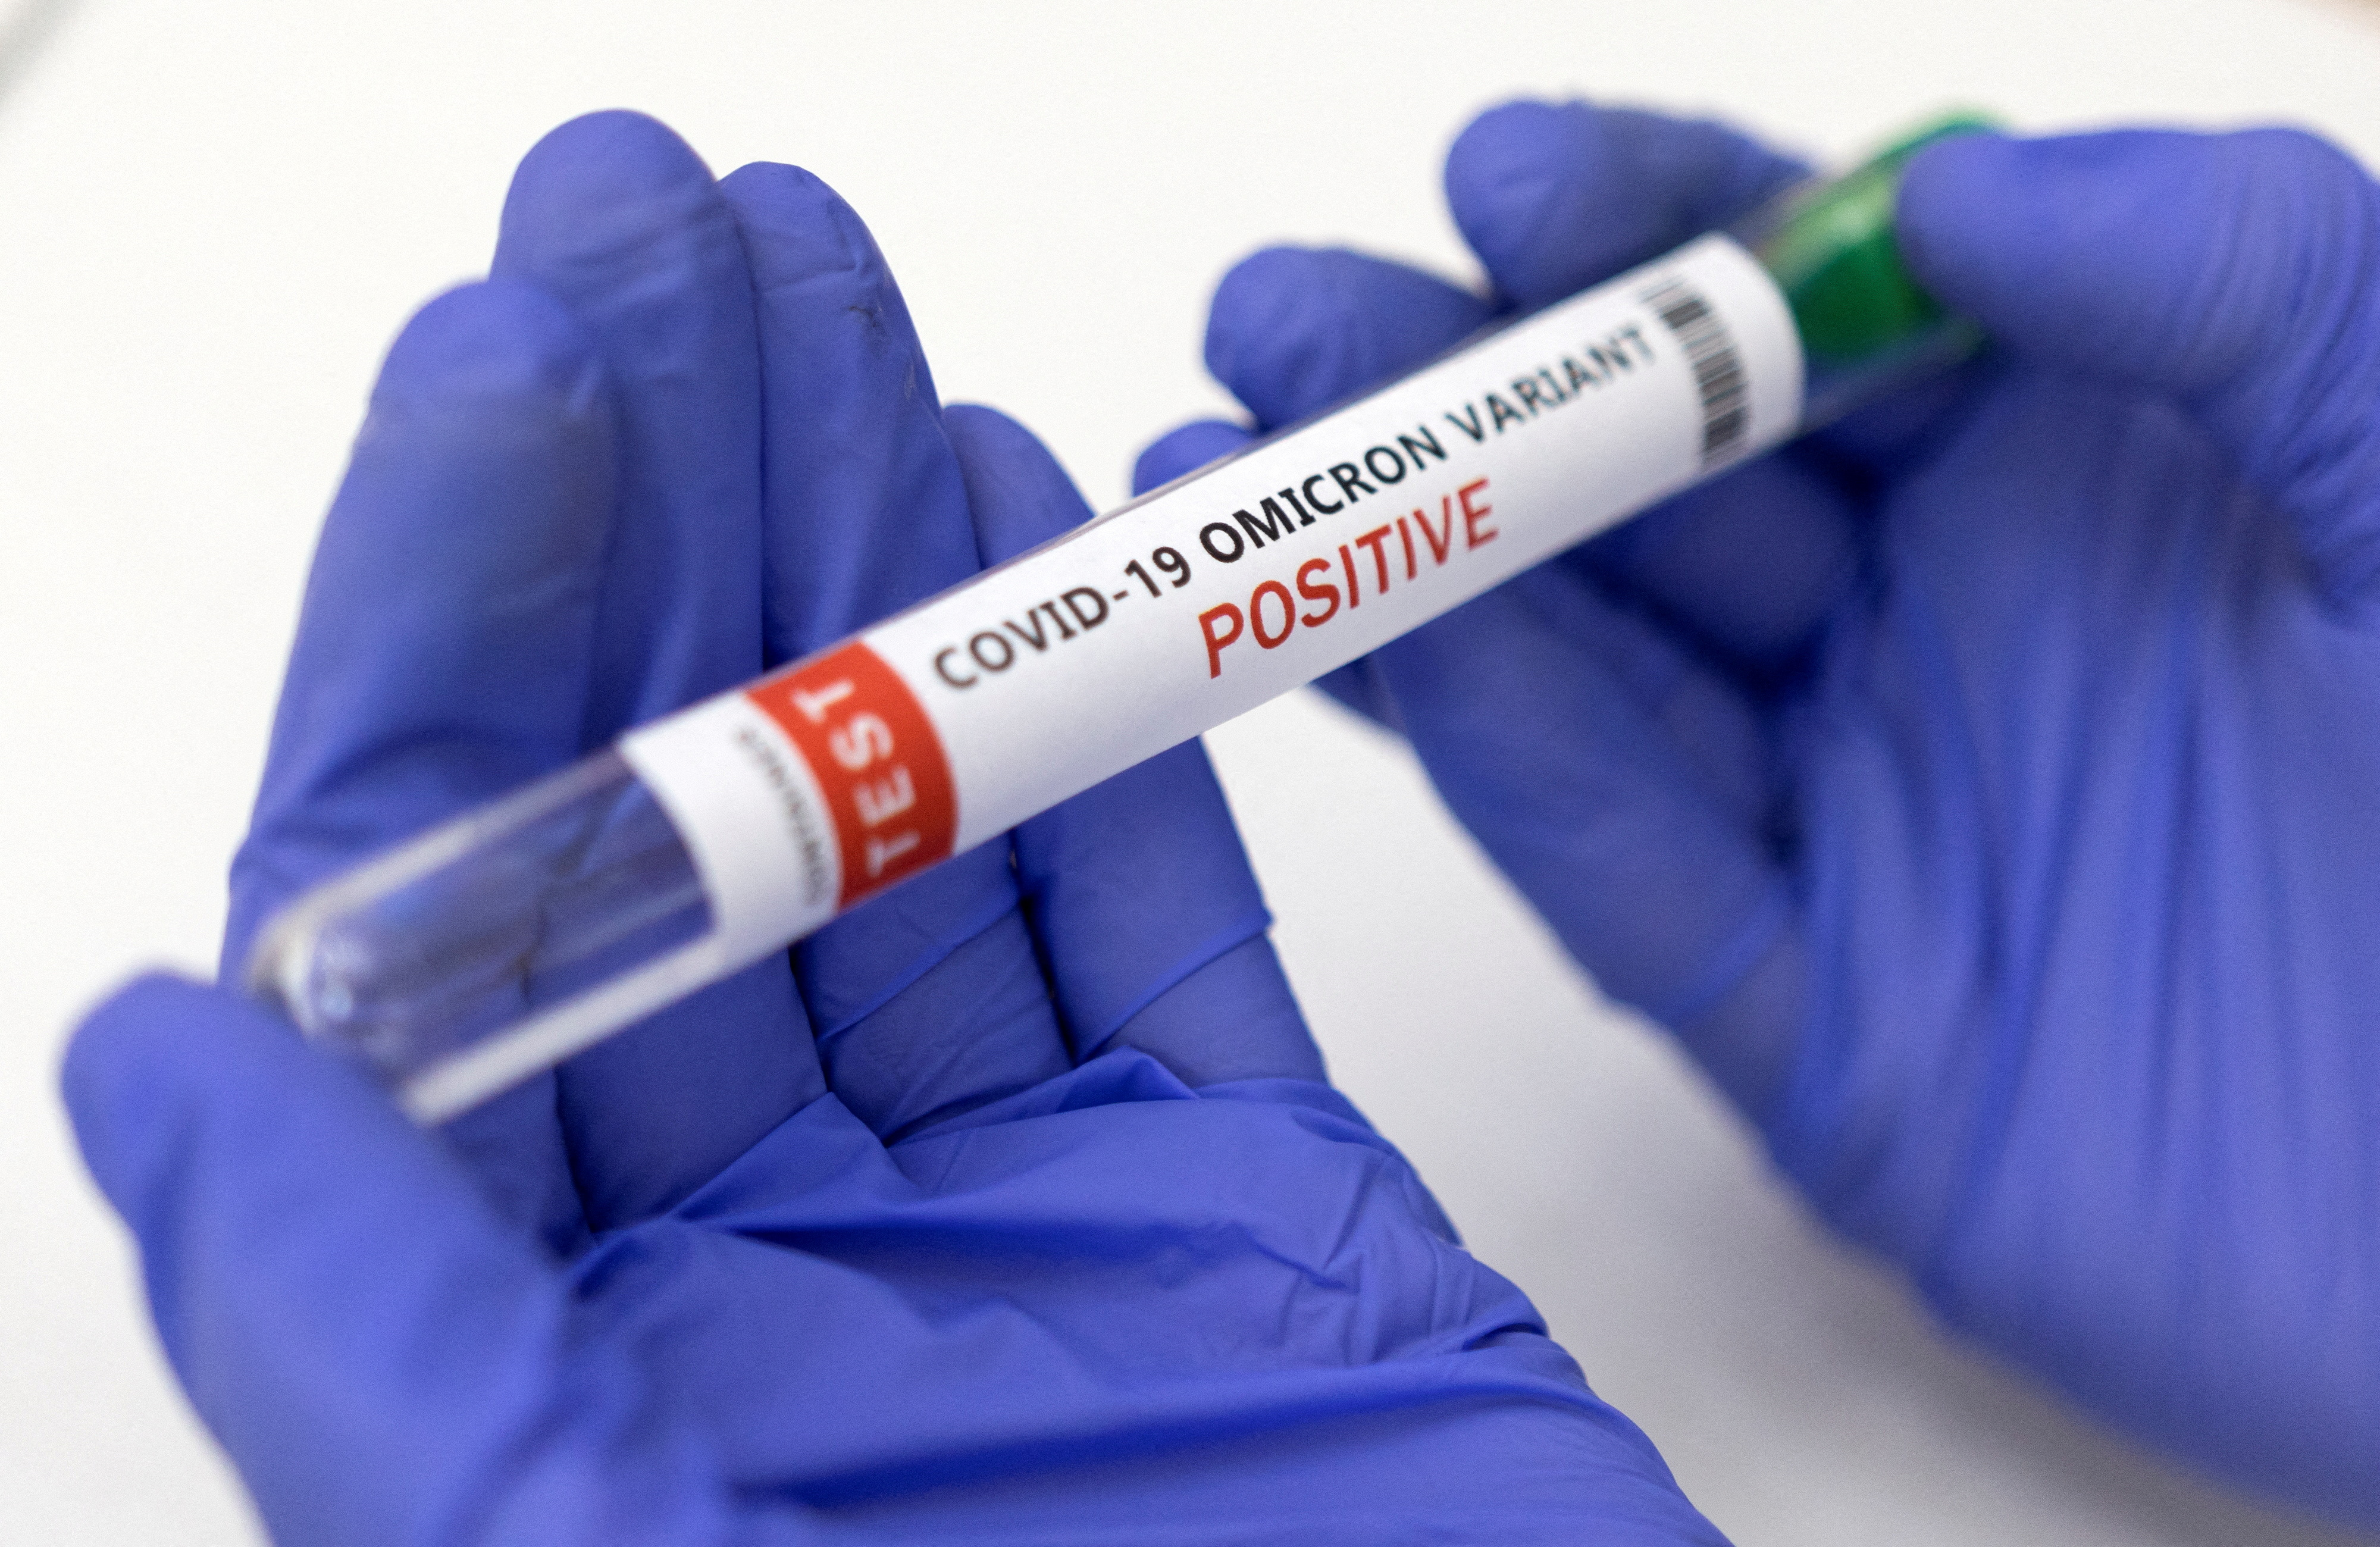 FILE PHOTO: Test tube labelled "COVID-19 Omicron variant test positive" is seen in this illustration picture taken January 15, 2022. REUTERS/Dado Ruvic/Illustration/File Photo